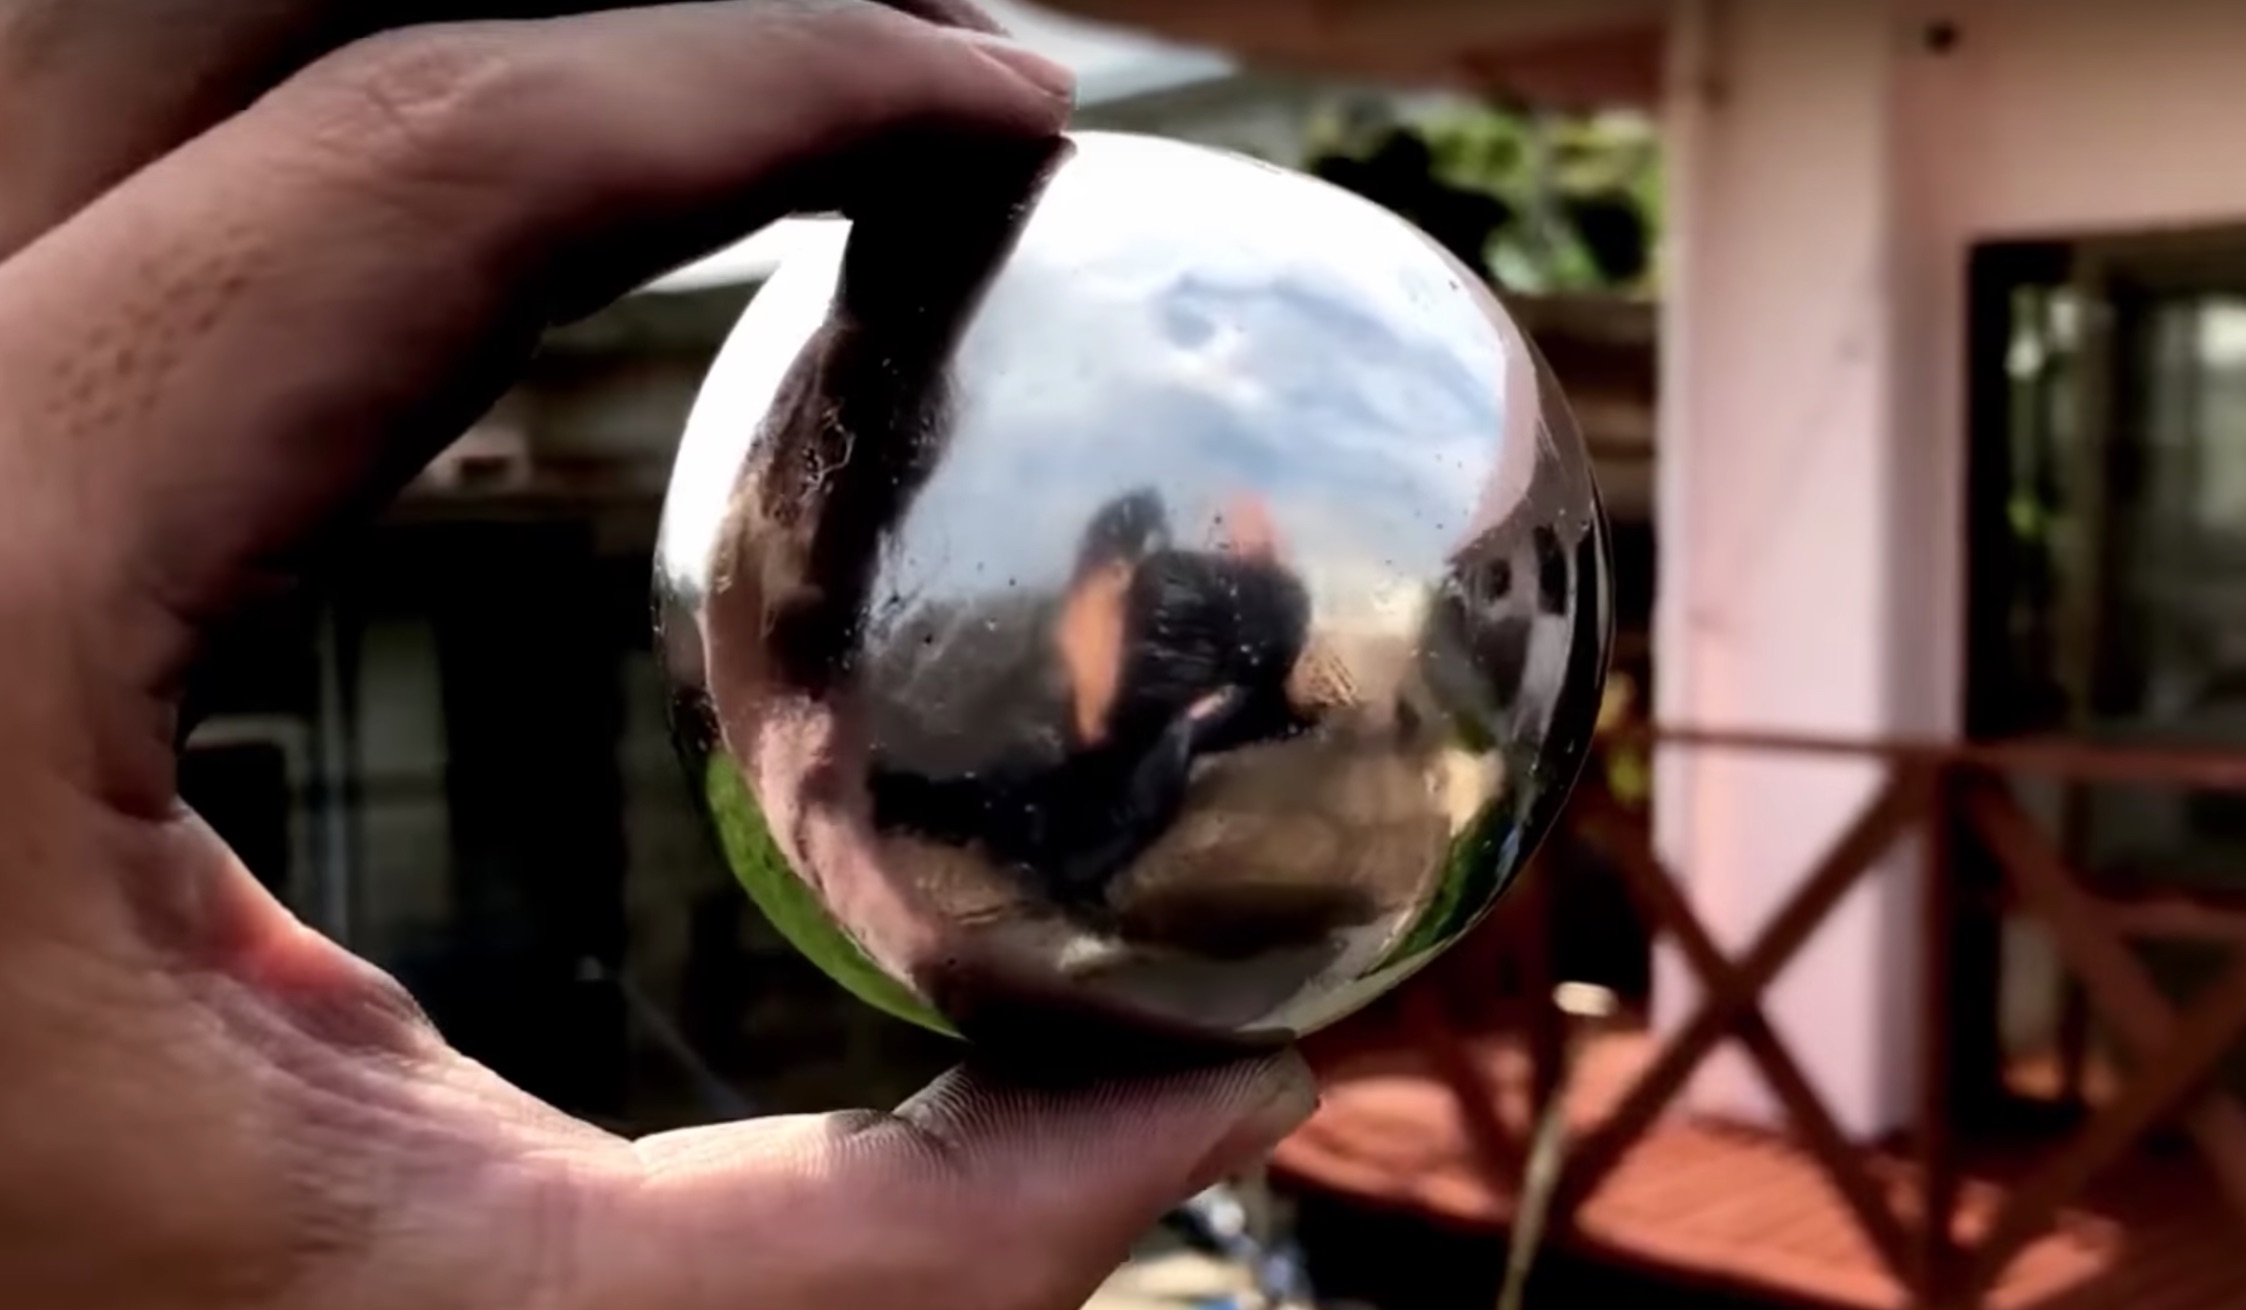 a shiny ball being held by the photographers left hand while outdoors in their back yard. Their reflection is vaguely visible.